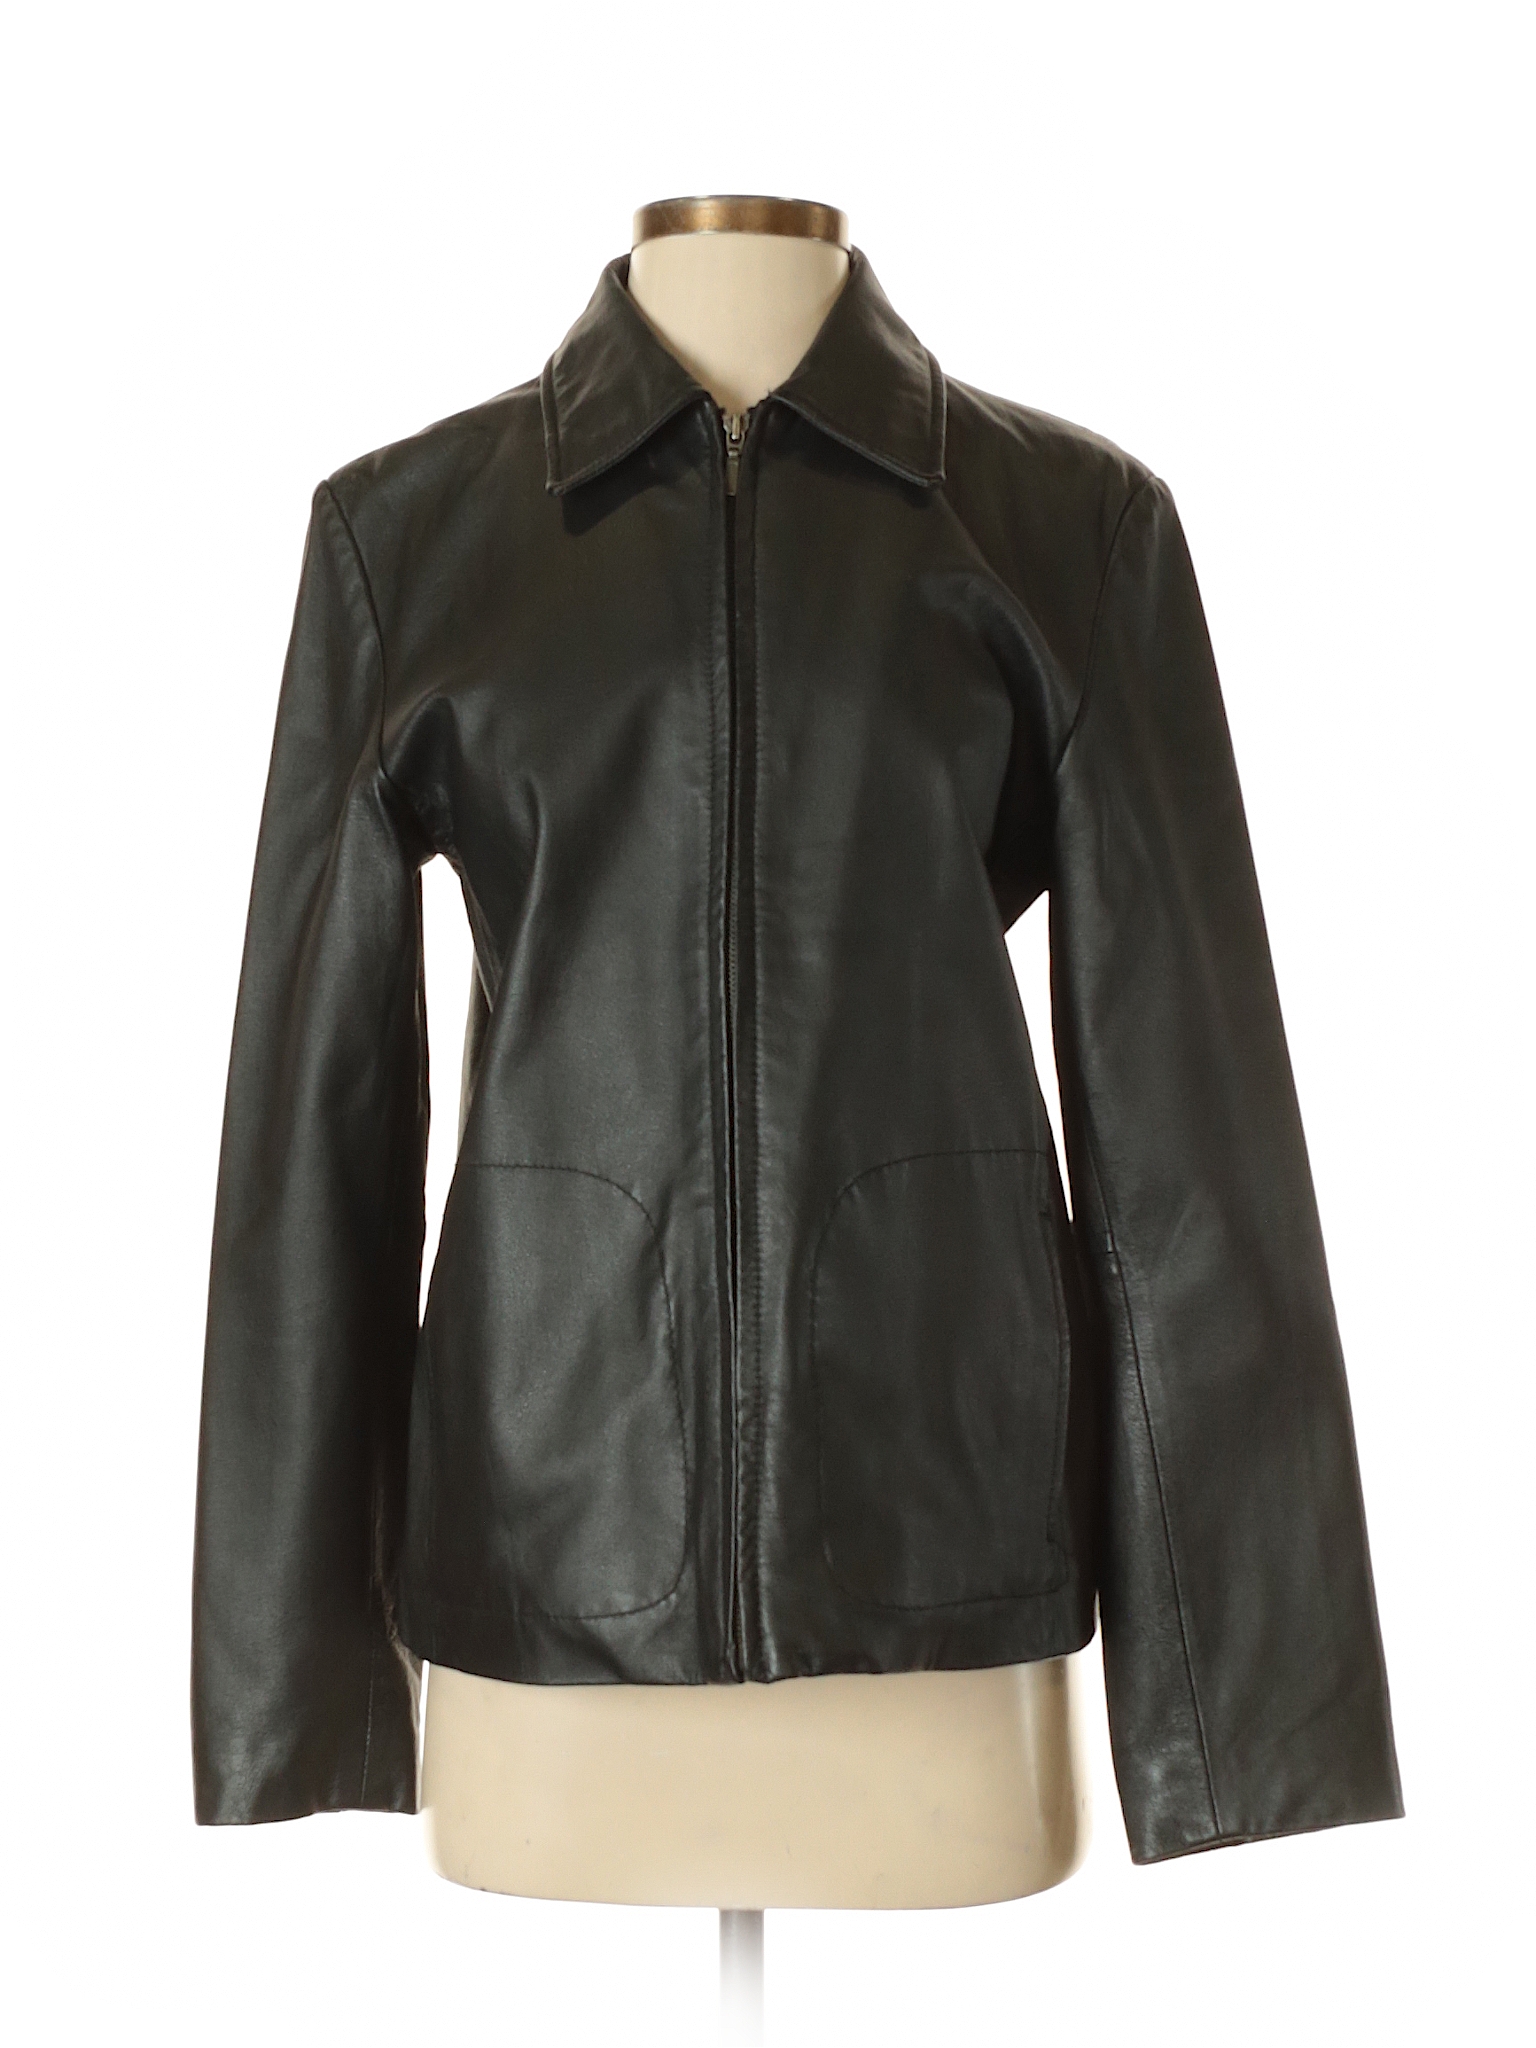 Genuine Sonoma Jean Company 100% Leather Solid Black Leather Jacket Size S  - 75% off | thredUP